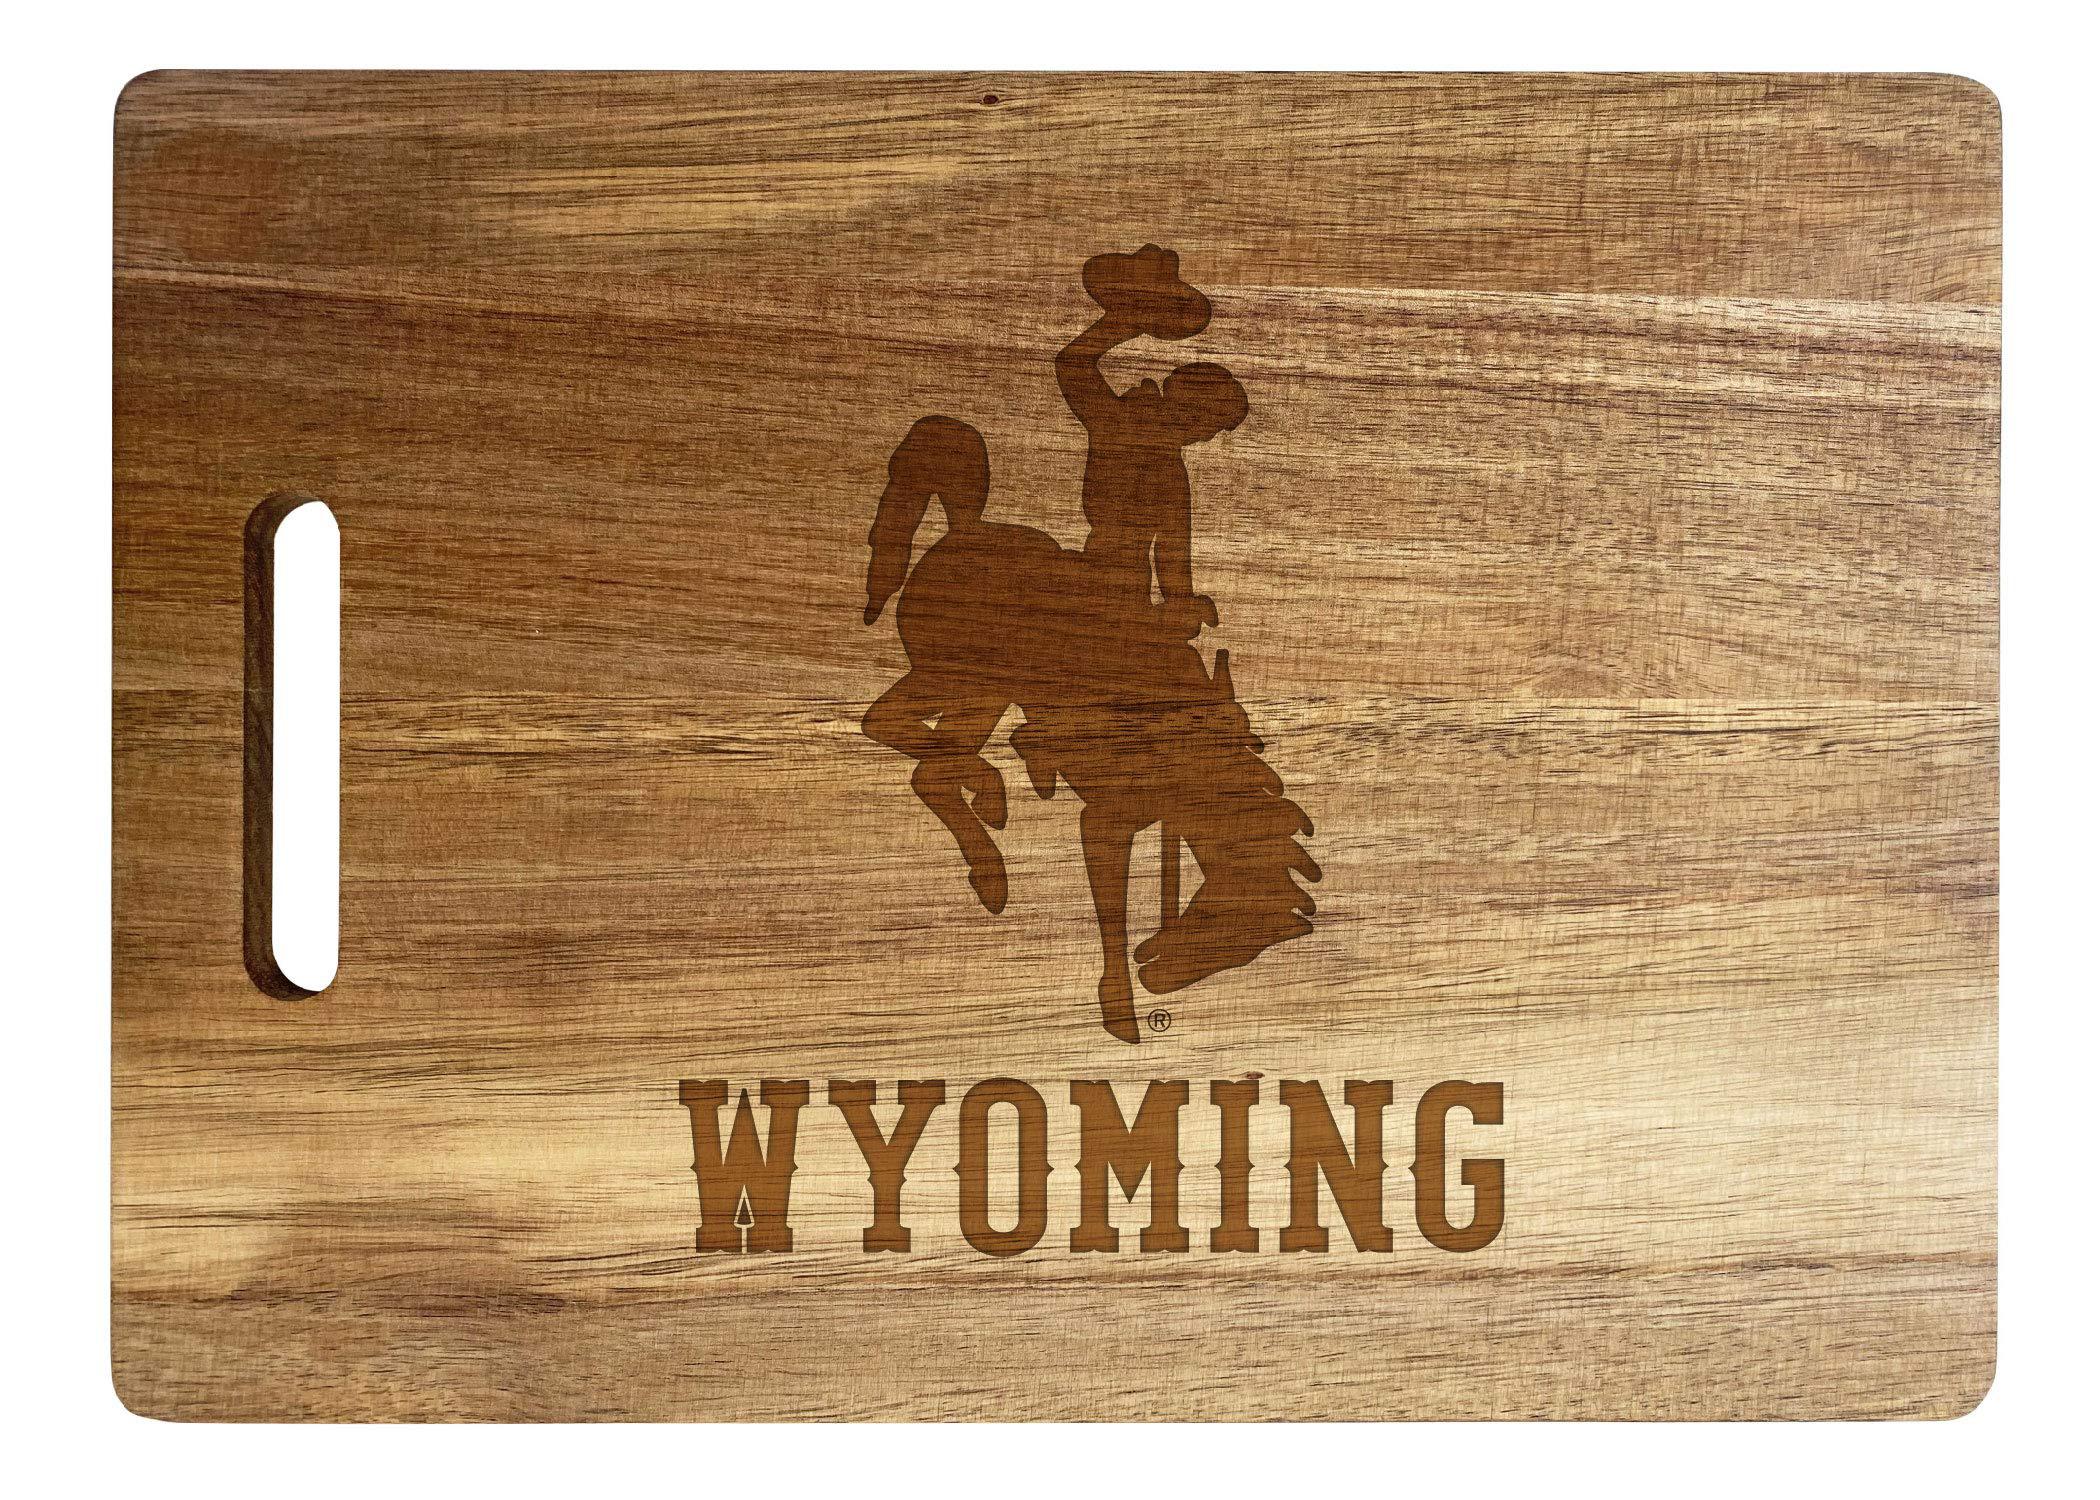 r and r imports university of wyoming engraved wooden cutting board 10" x 14" acacia wood - large engraving